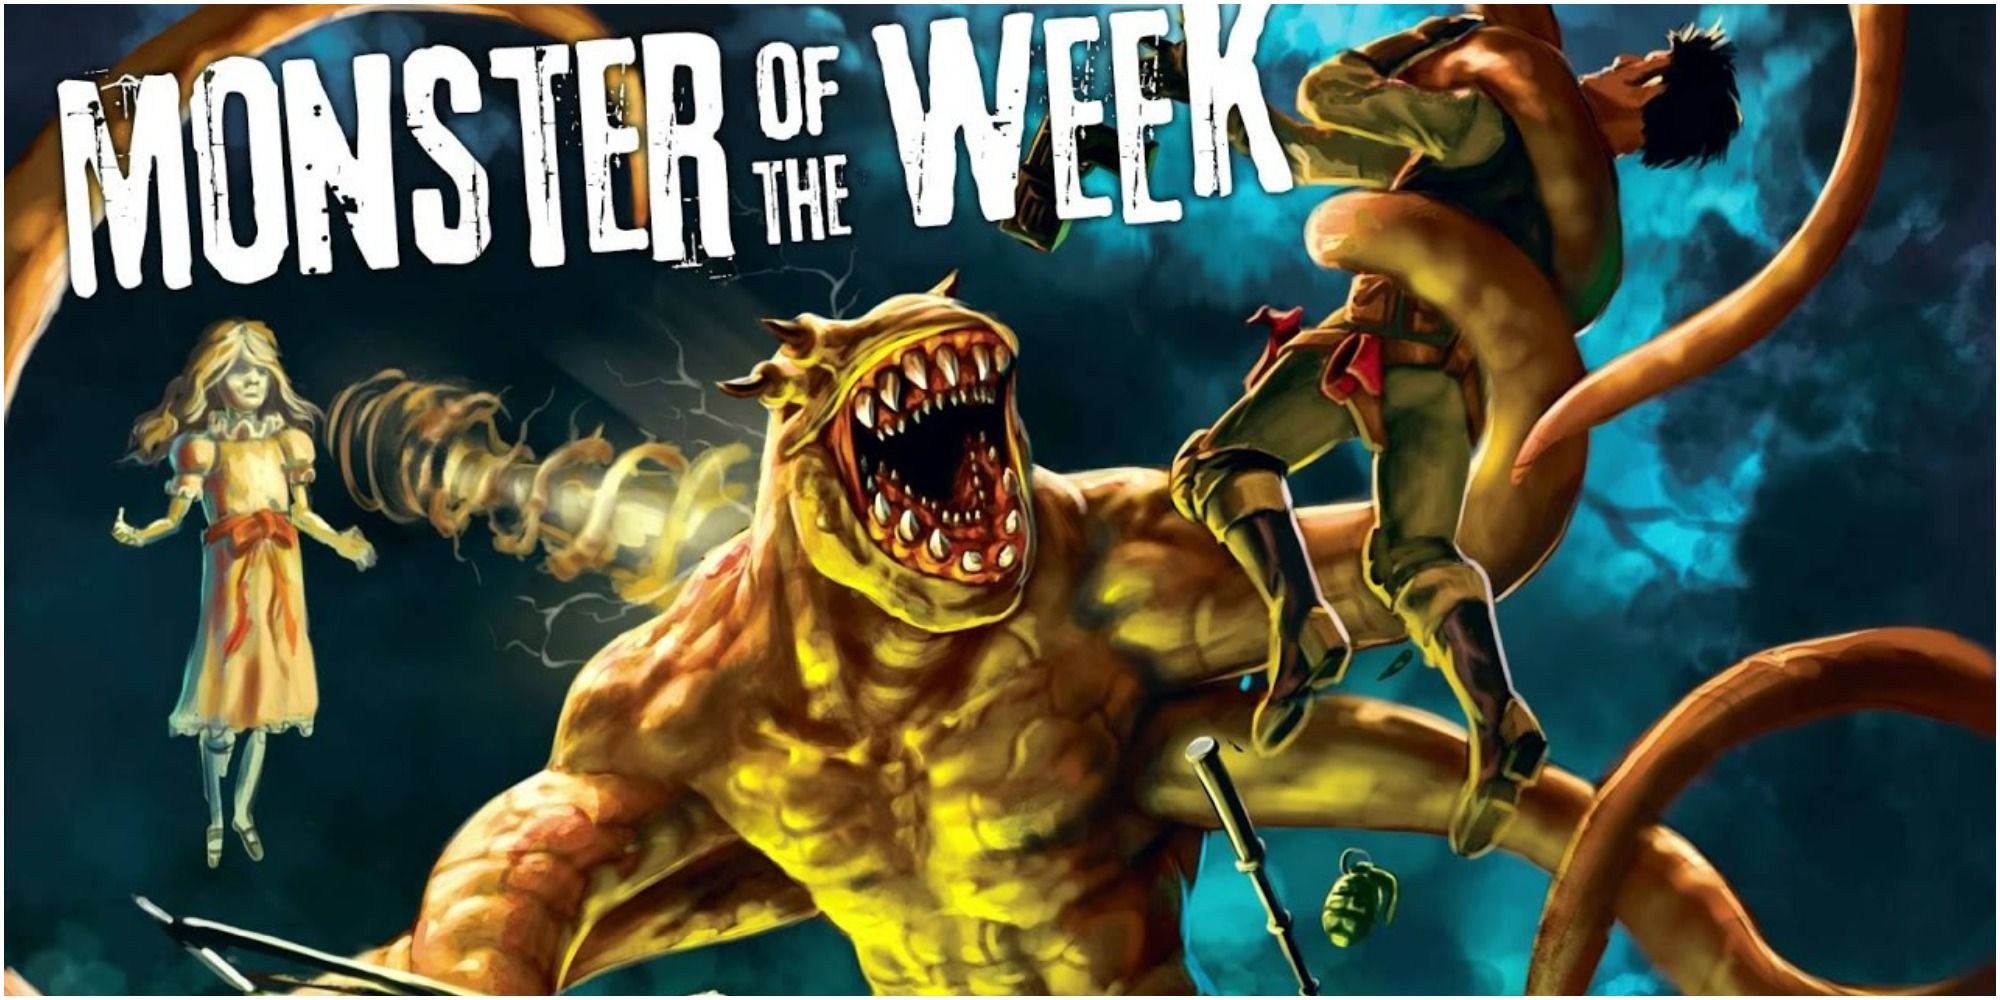 Art from the cover of Monster of the Week, a monster with tentacles is controlled by a little girl spirit and captures a hero.